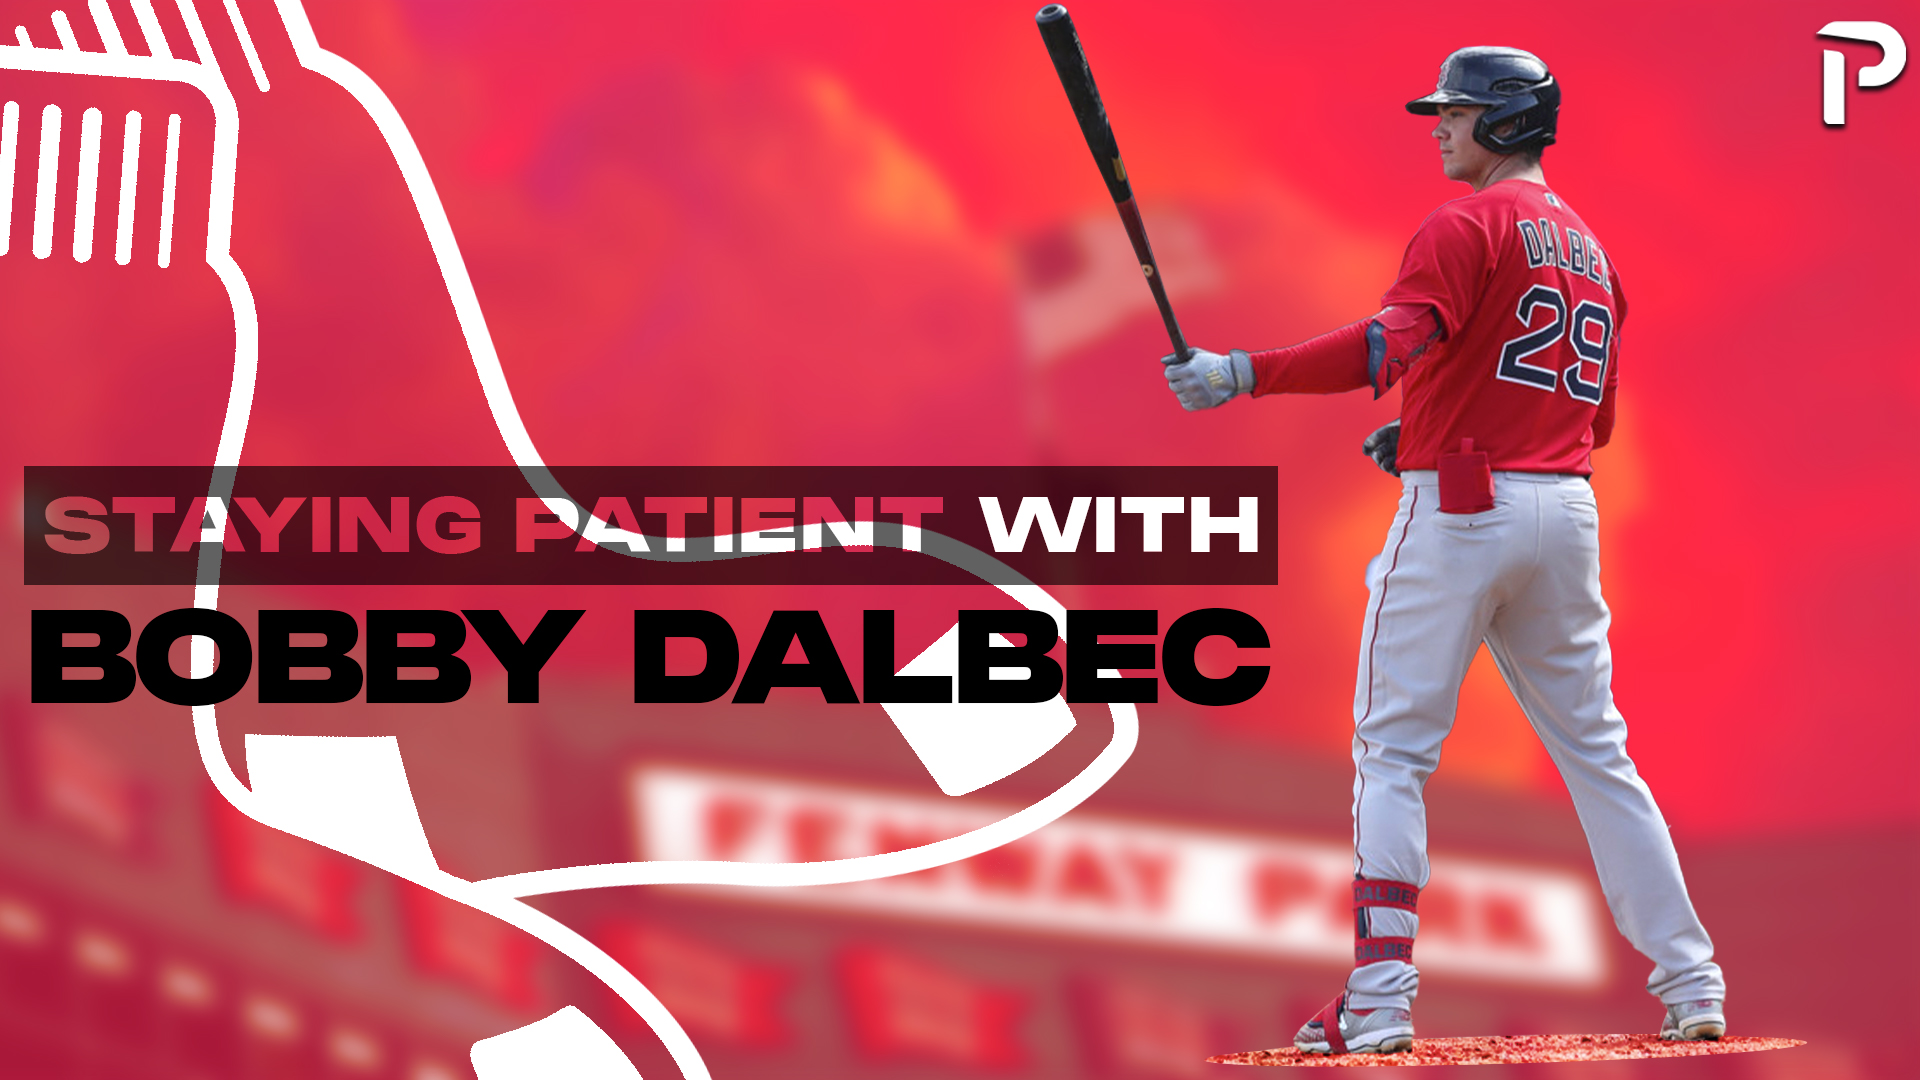 Staying Patient With Bobby Dalbec